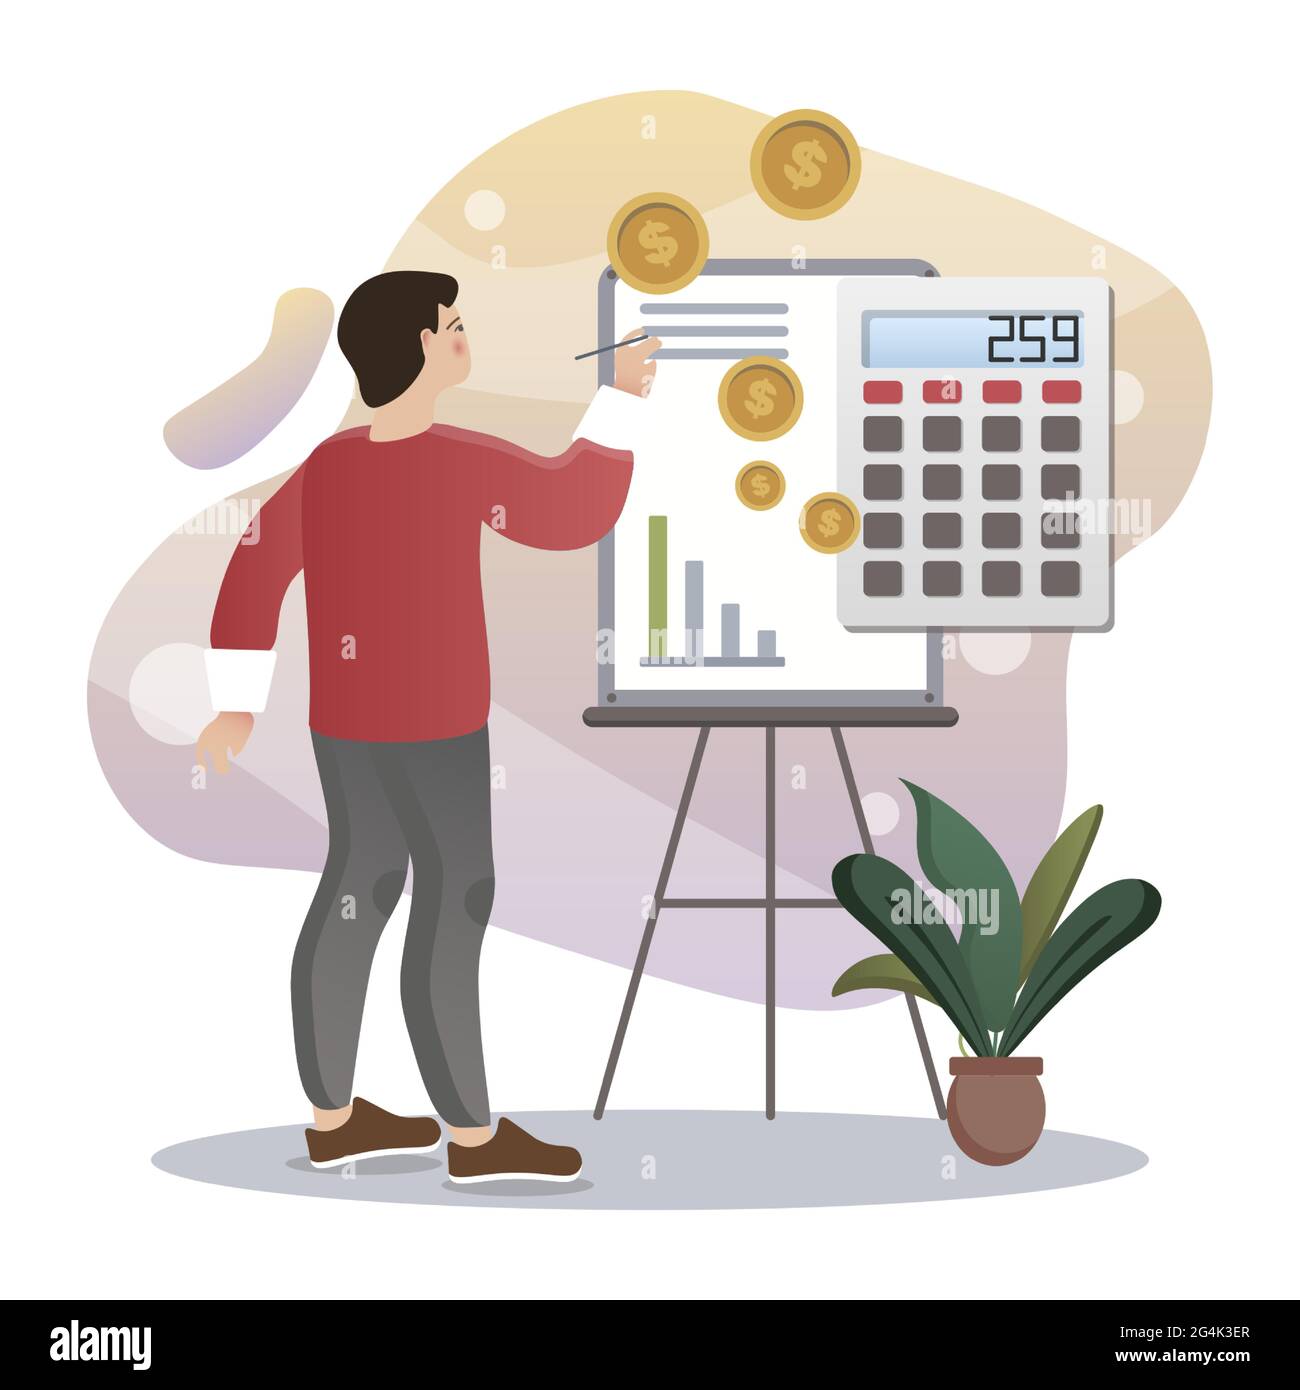 Budget Planing. Isolated flat style colored illustration. Marketing solution. Accounting costs, cost, accounting. Stock Vector